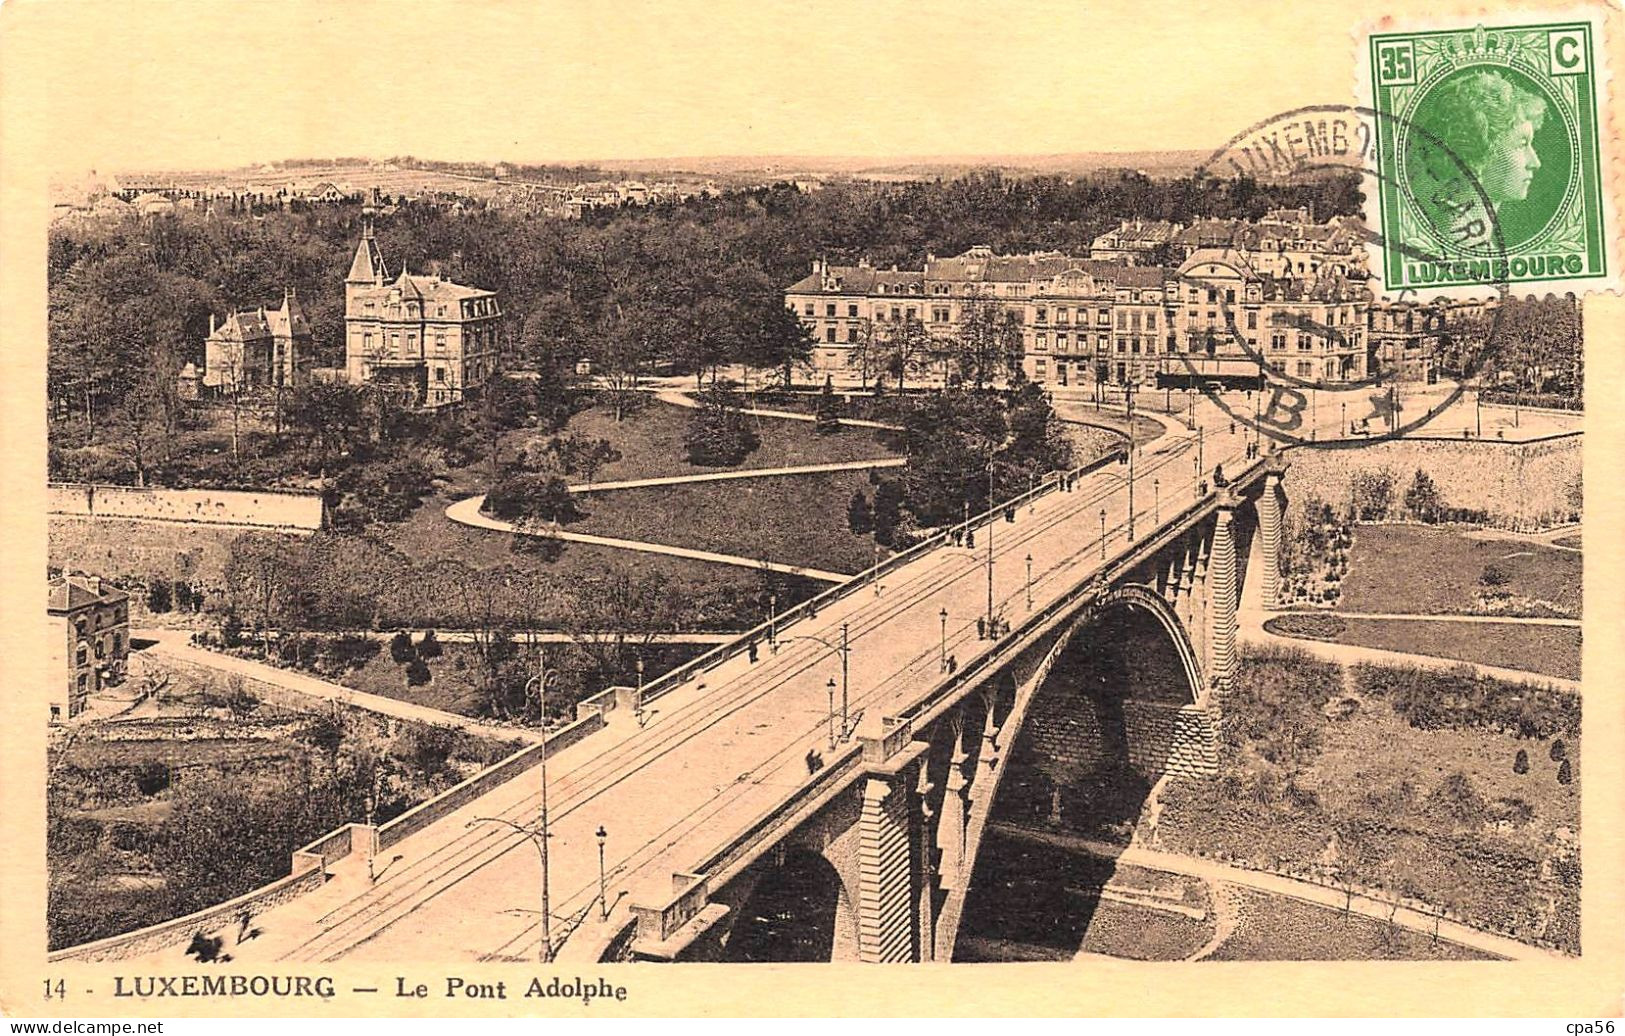 Le PONT ADOLPHE - LUXEMBOURG - Cachet LUXEMBOURG GARE B - Luxemburgo - Ciudad